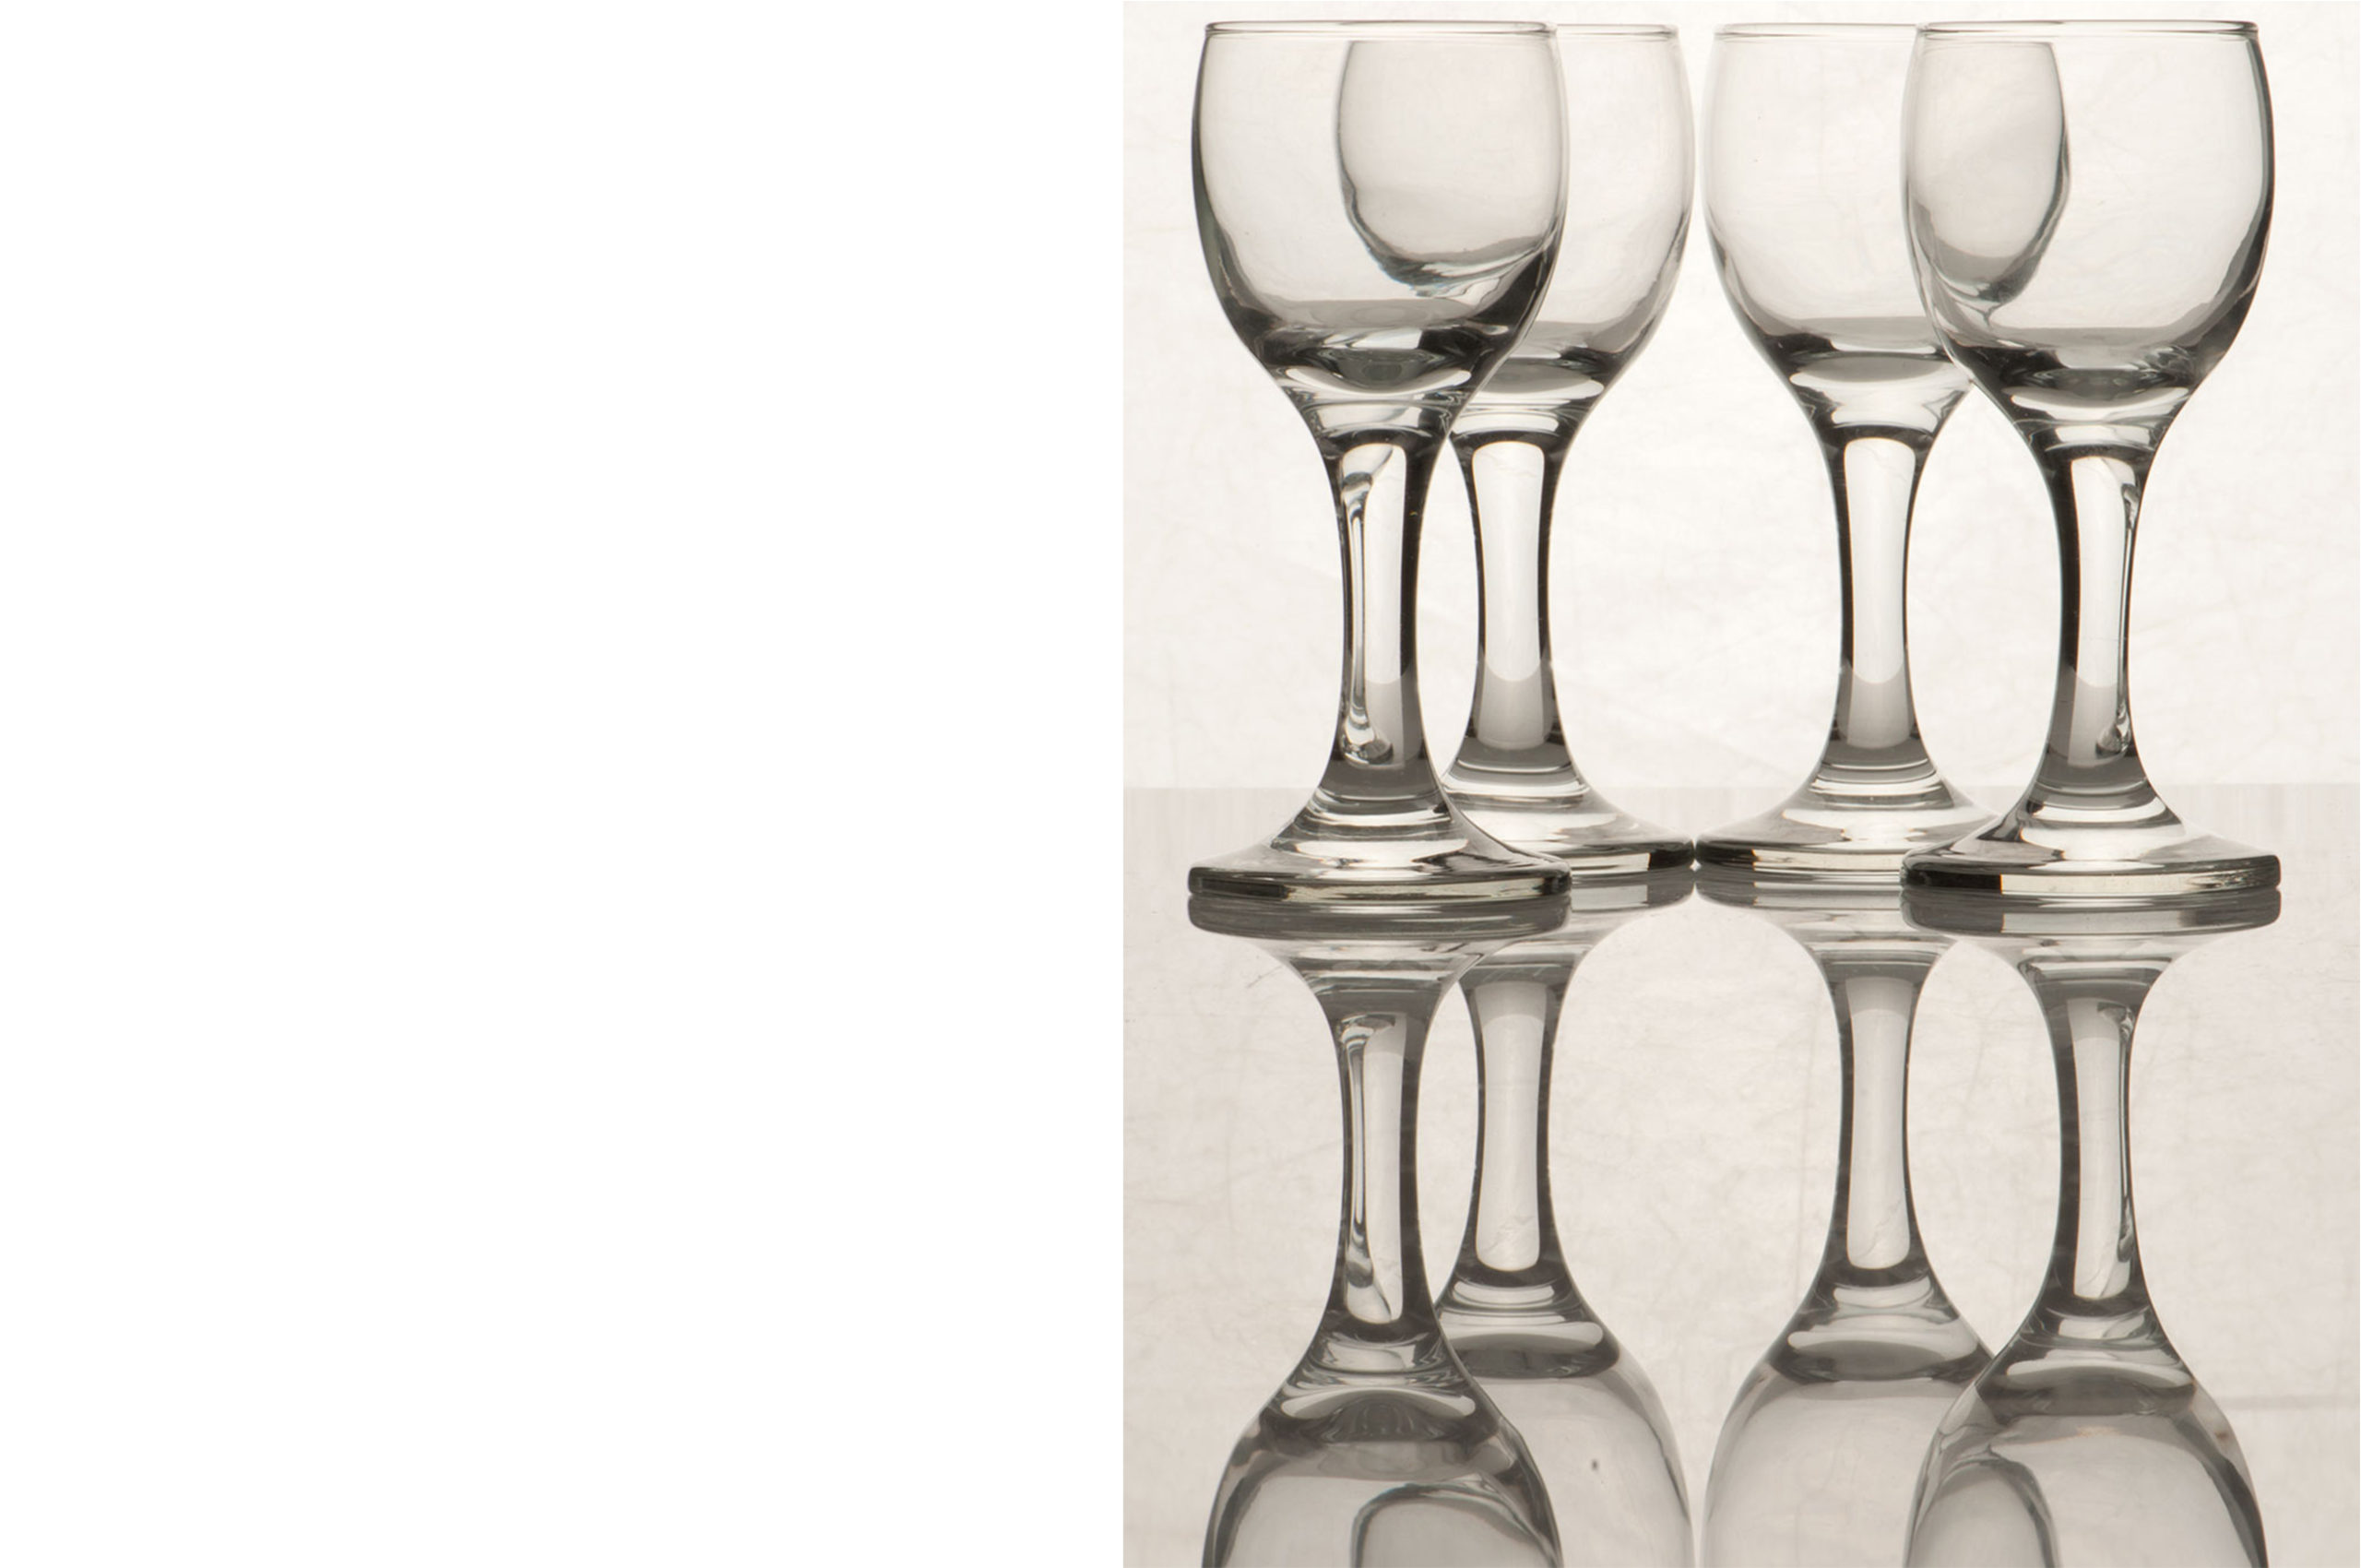 (Before Editing) Set of Glassware photographed to show reflection on clear surface